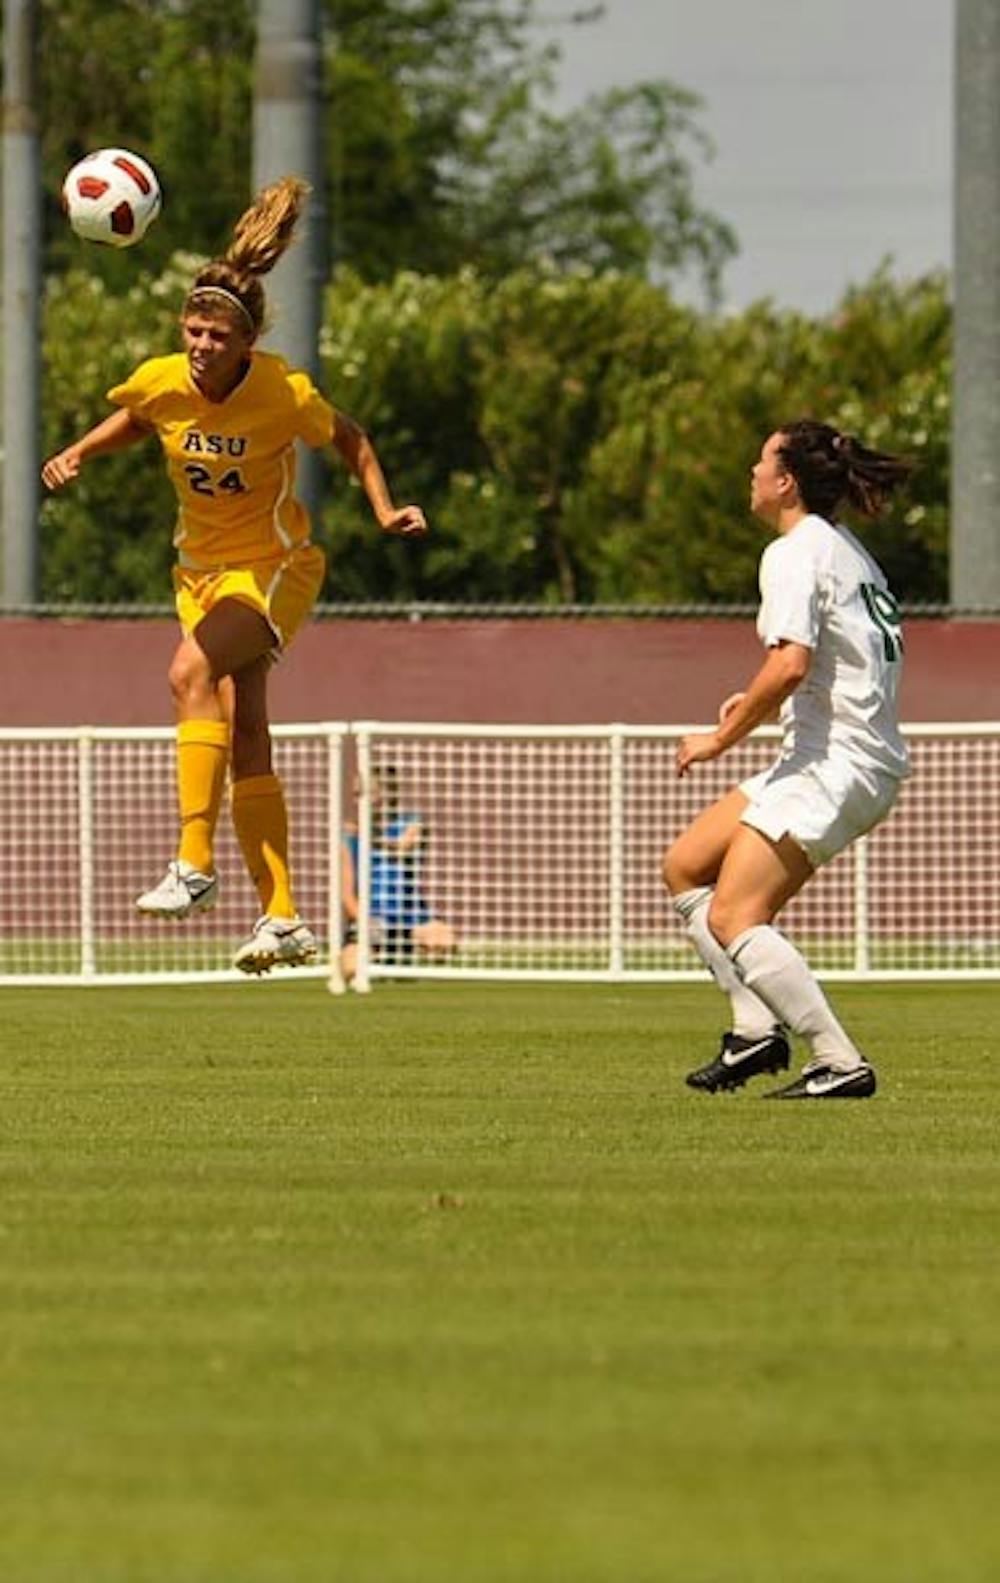 OFF THE GROUND: Freshman defender/midfielder Kaitlyn Pavlovich heads a ball against Baylor. The Sun Devils open Pac-10 play Friday against Washington State after scoring zero goals in their last three games. (Photo by Aaron Lavinsky)